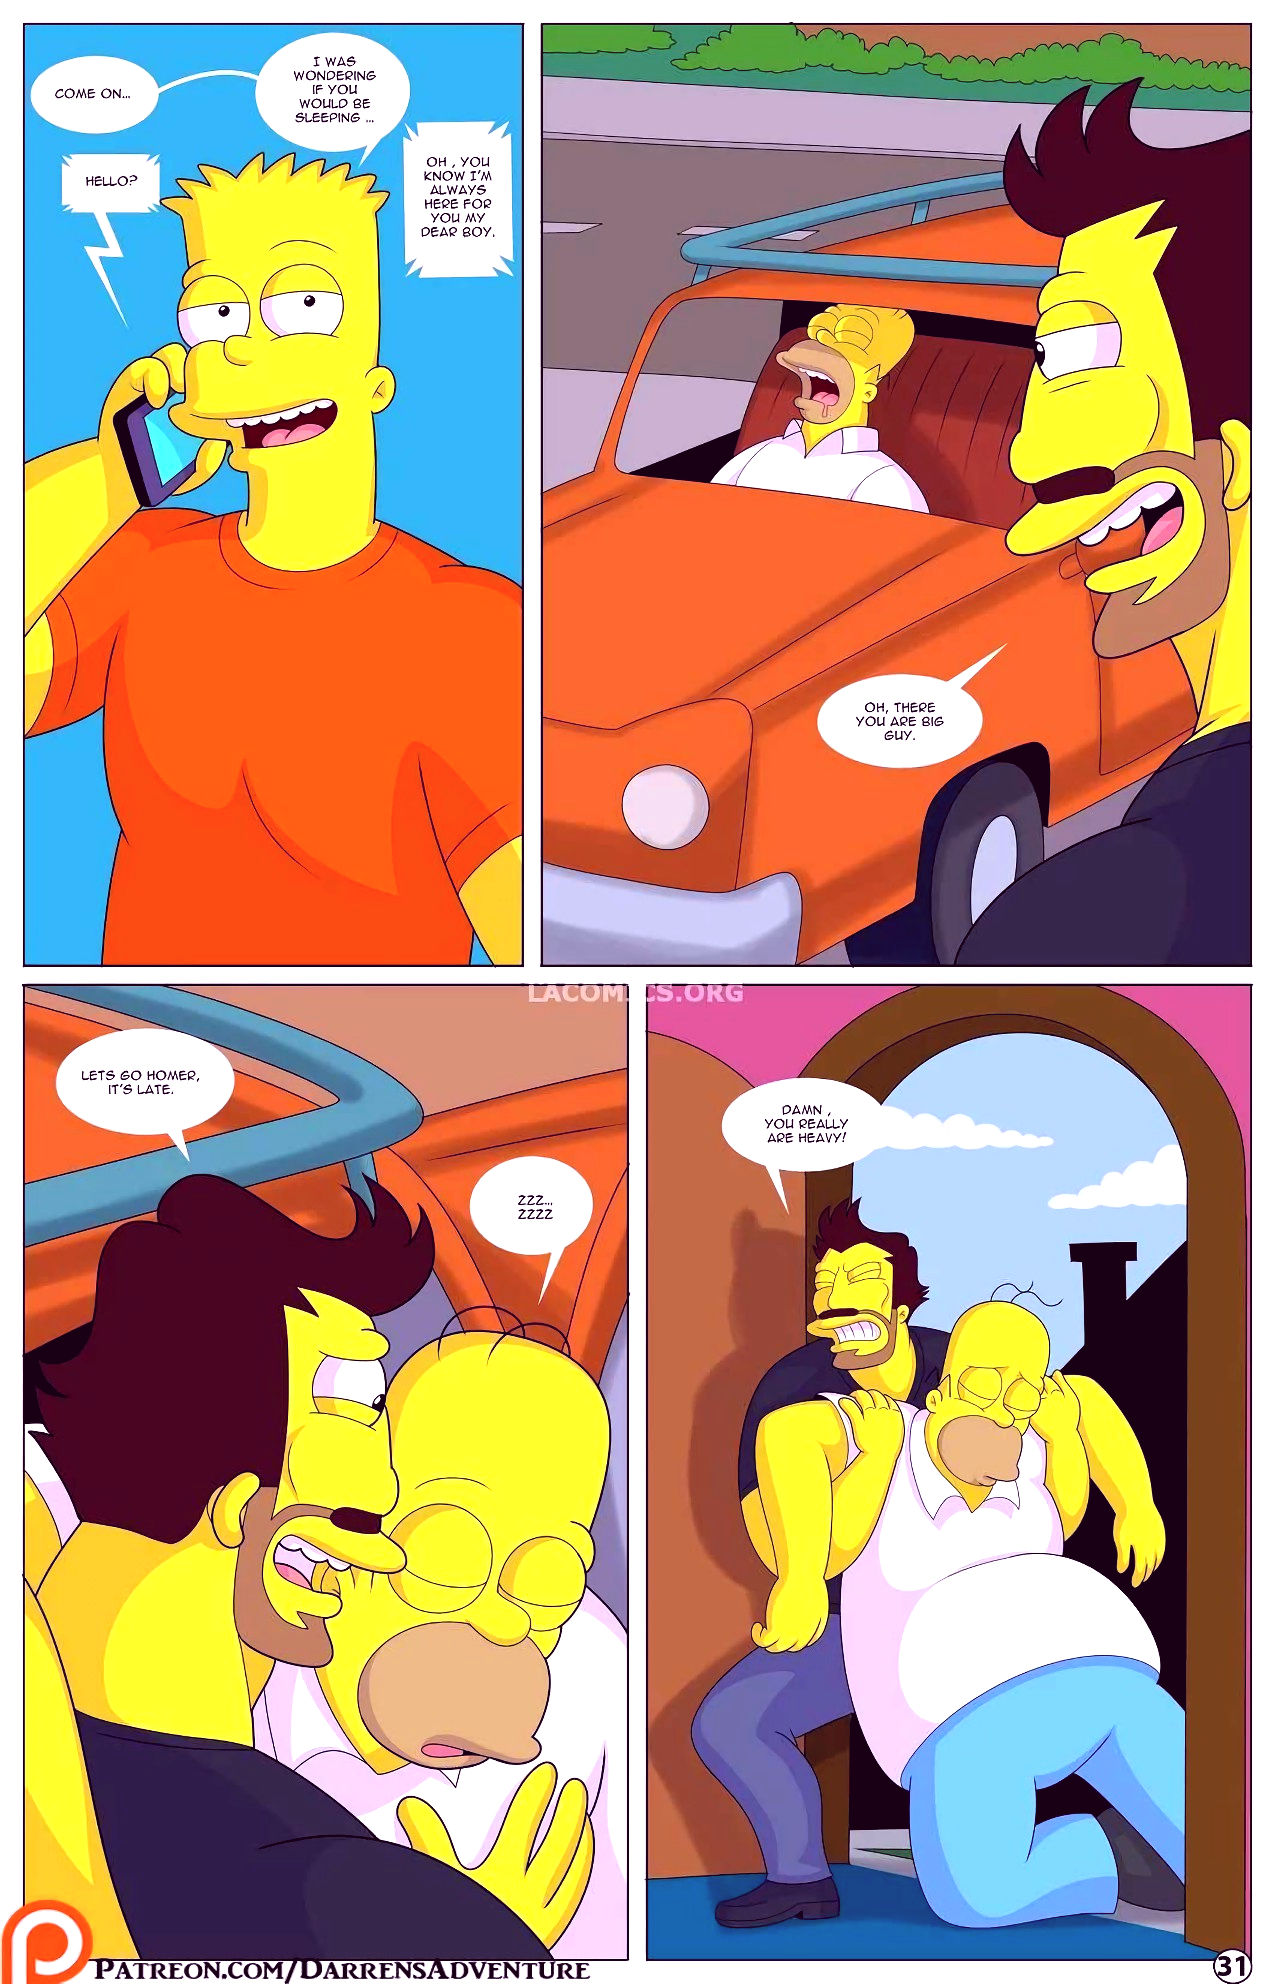 Darrens adventure or welcome to springfield porn comic picture 109